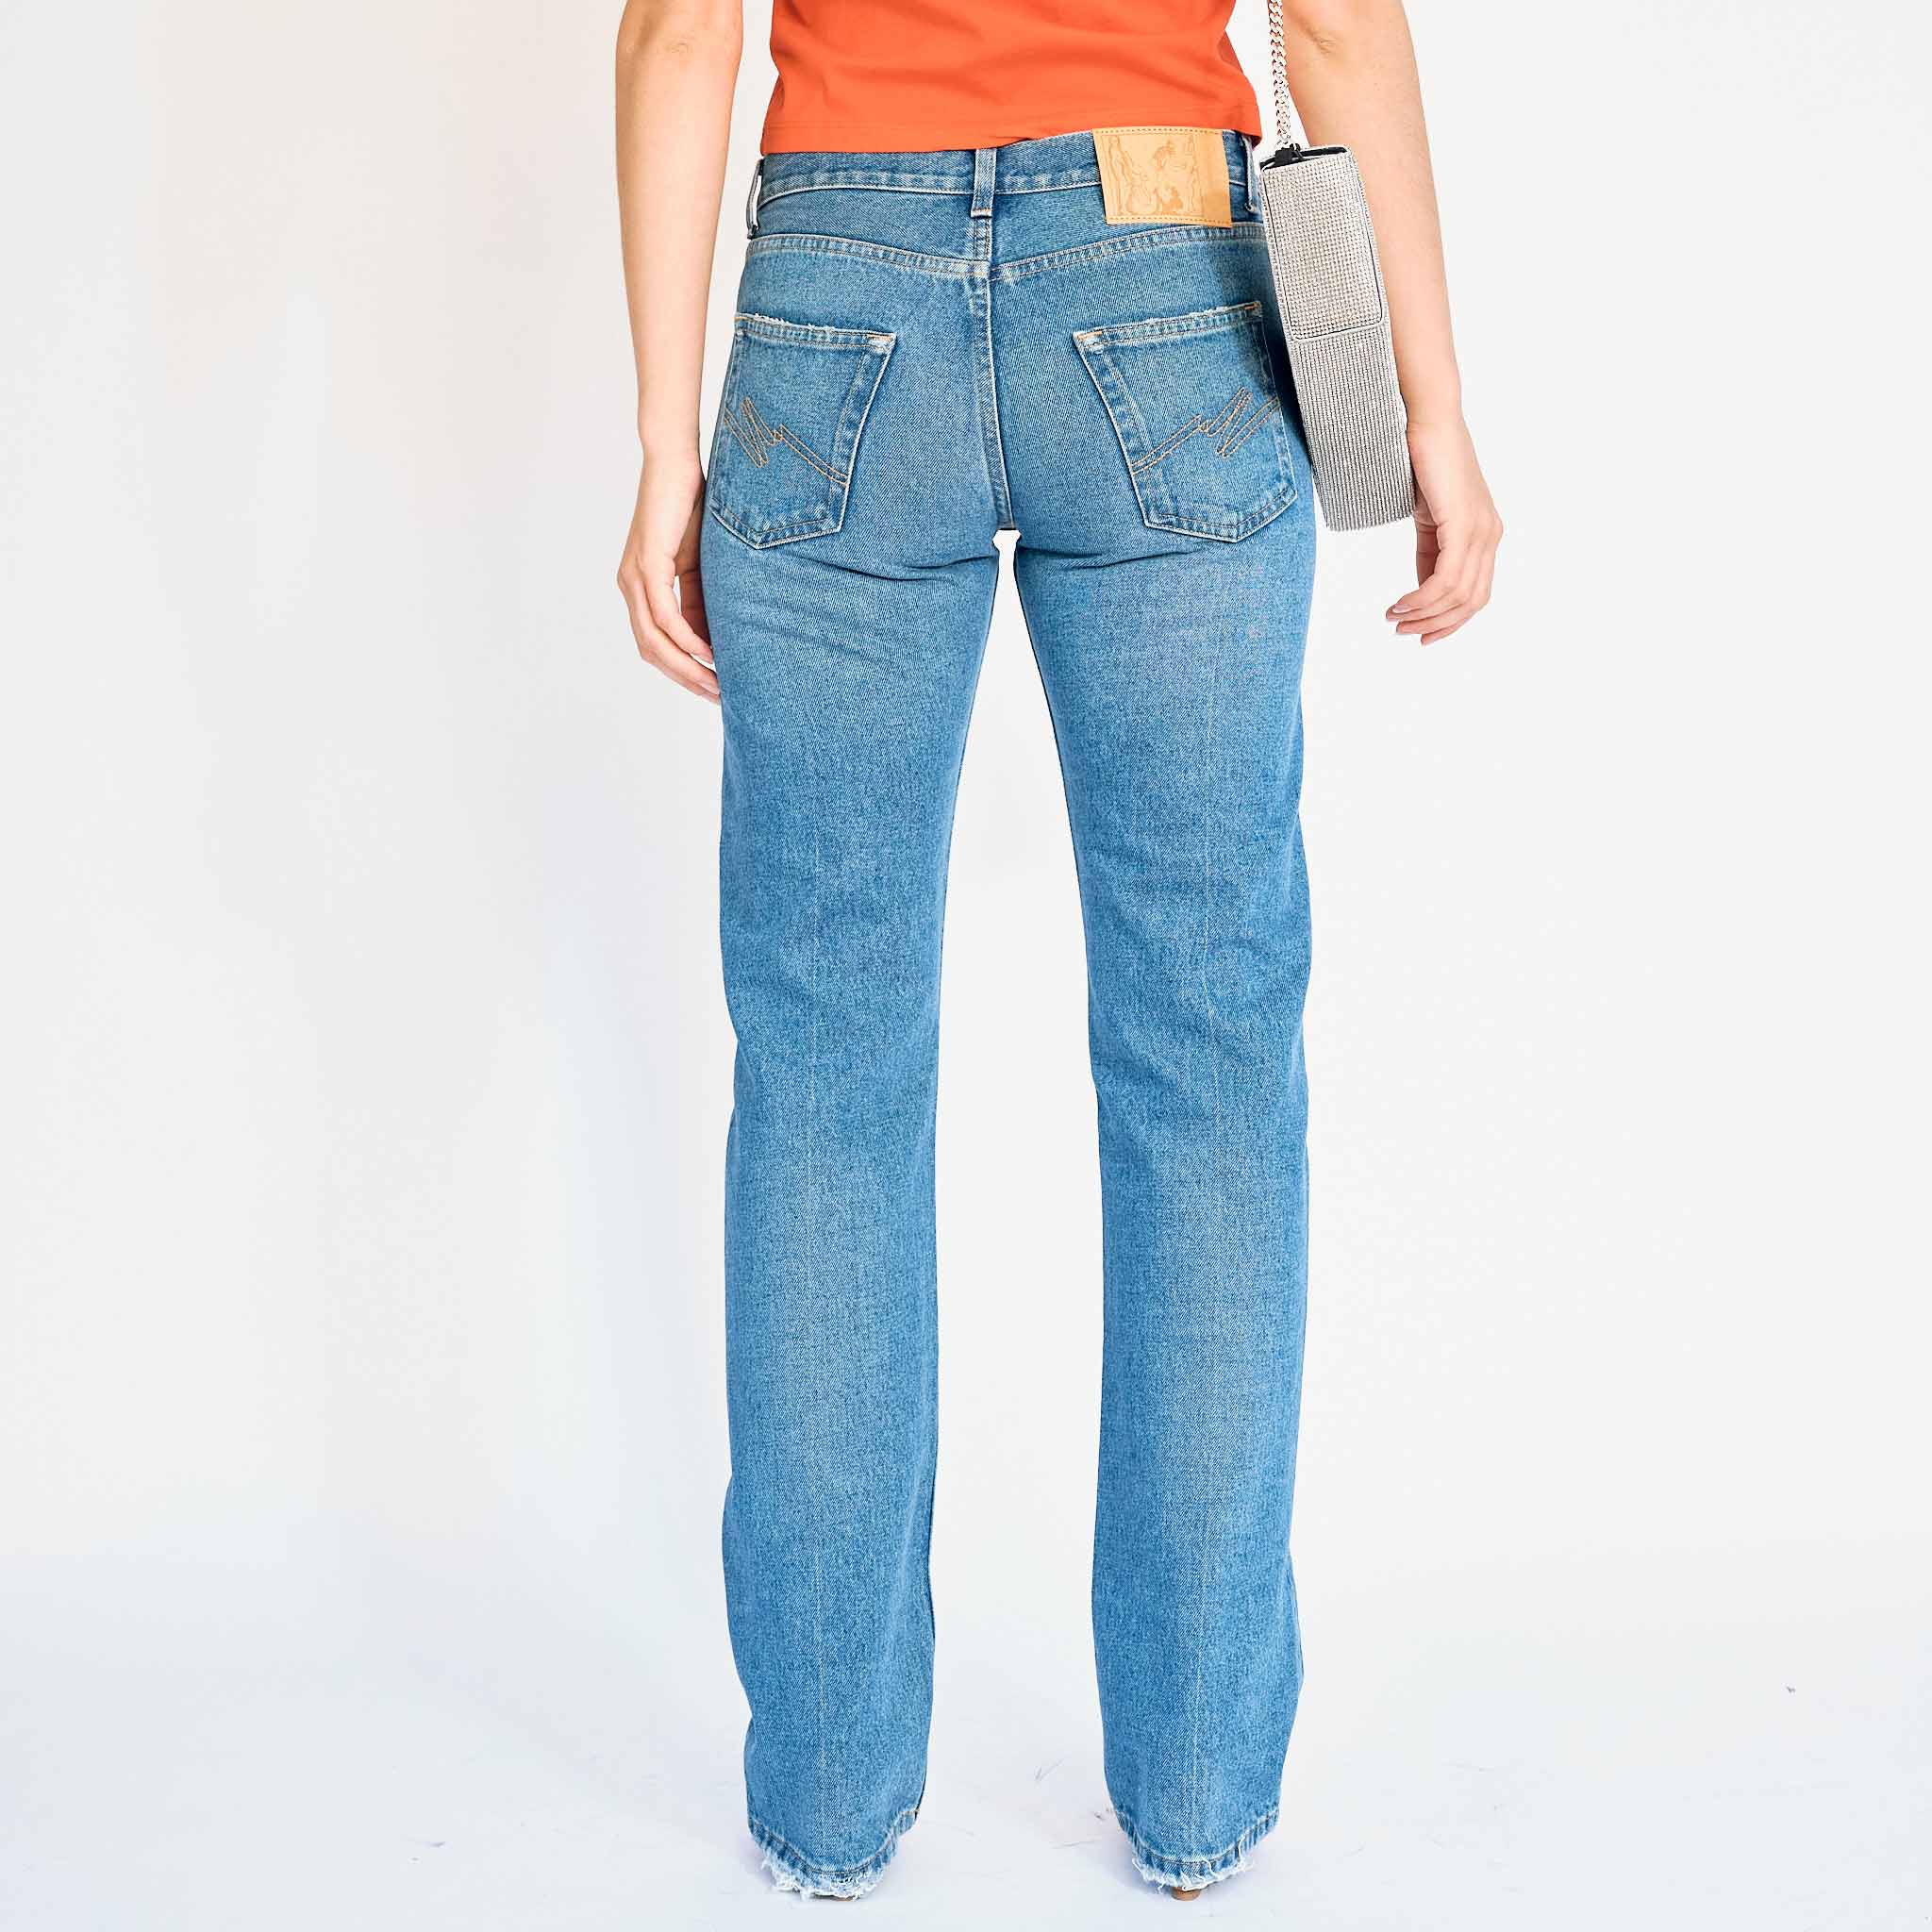 Martine Rose classic womens low rise jeans on a model - back view.